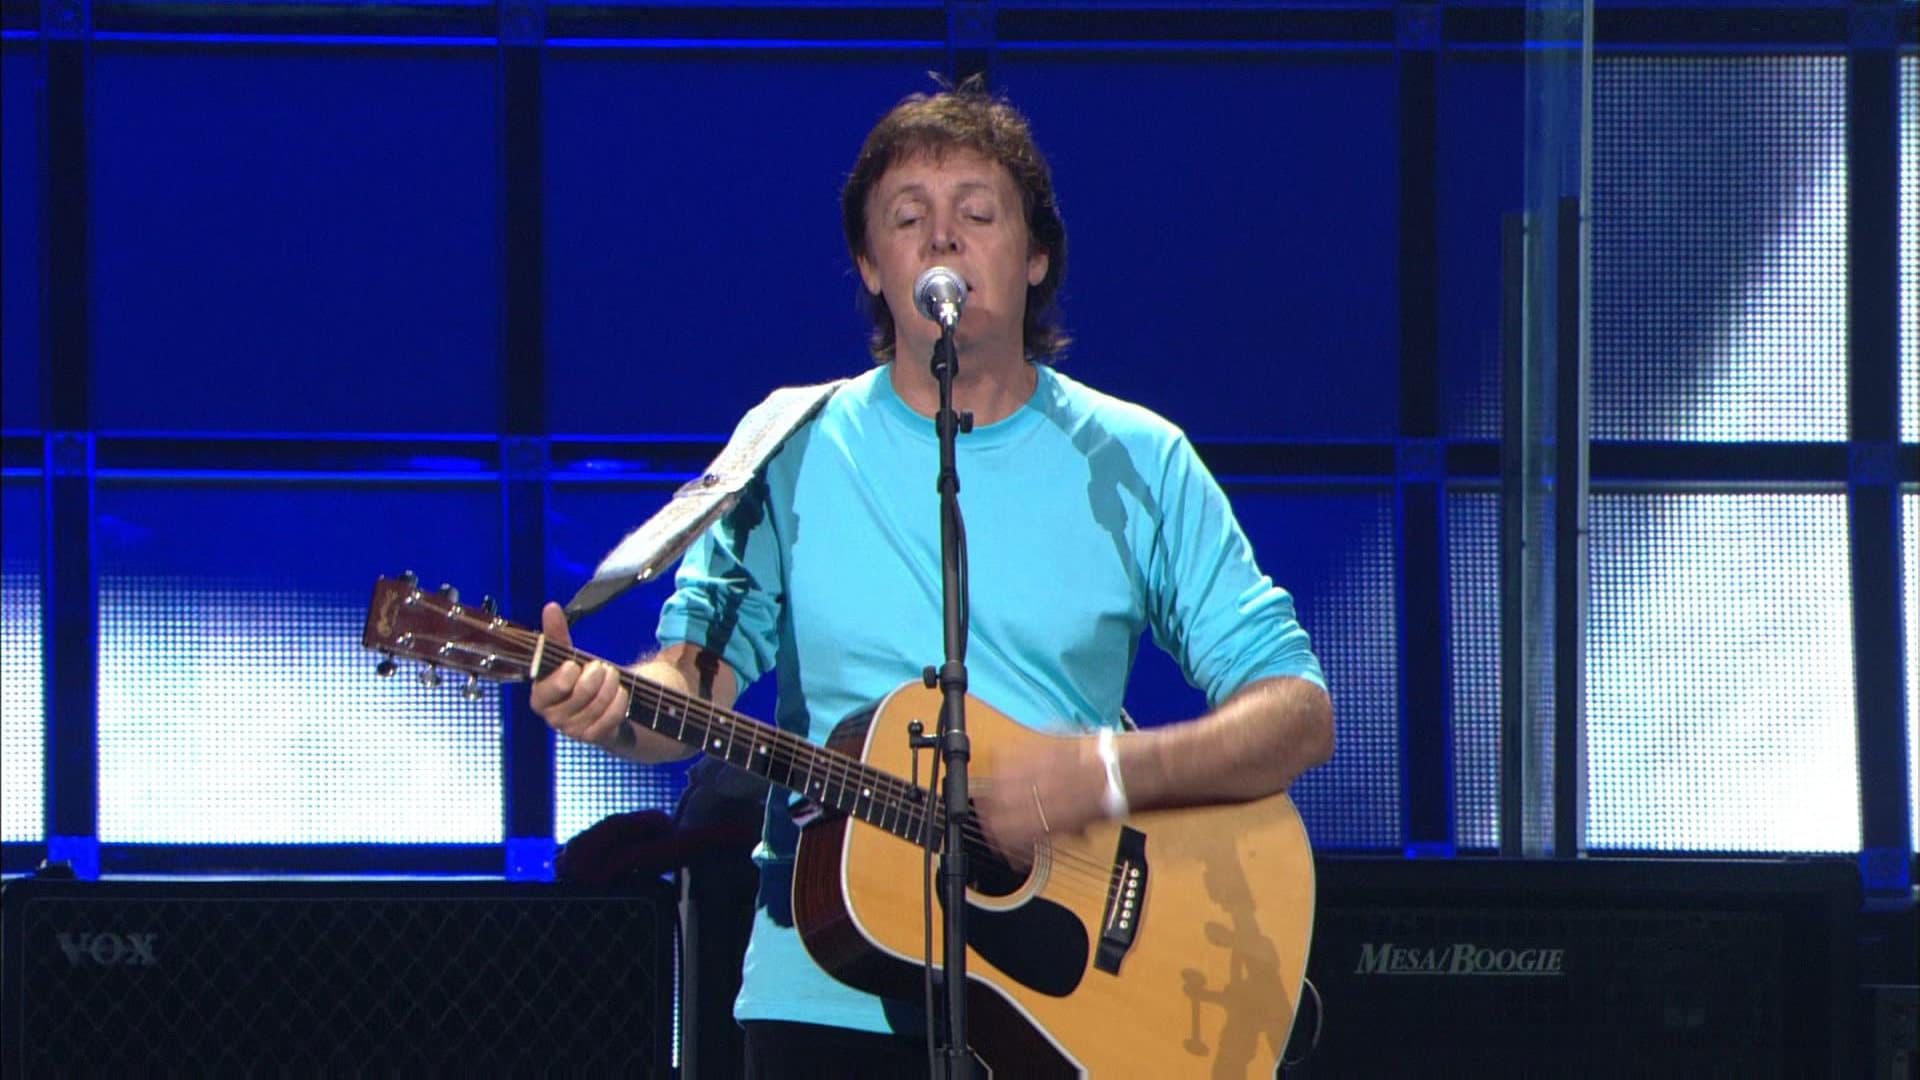 Paul McCartney: The Space Within Us backdrop